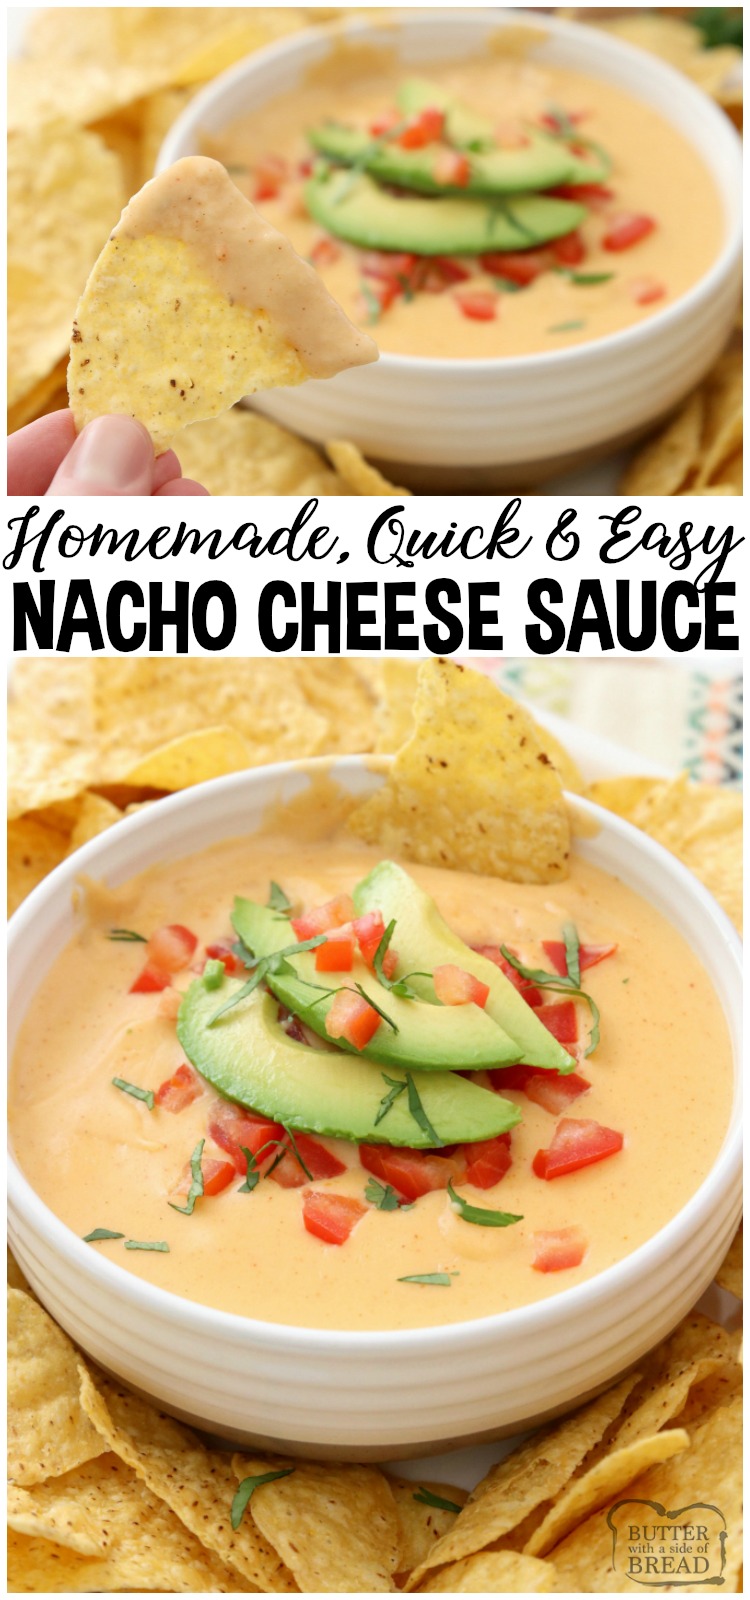 Easy Nacho Cheese sauce recipe with only 4 ingredients and is made in minutes! Smooth, creamy with great nacho cheese flavor, this recipe is perfect for parties, busy weeknight dinners and game day food! #nacho #cheese #homemade #nachos #recipe #appetizer #gameday #partyfood from BUTTER WITH A SIDE OF BREAD